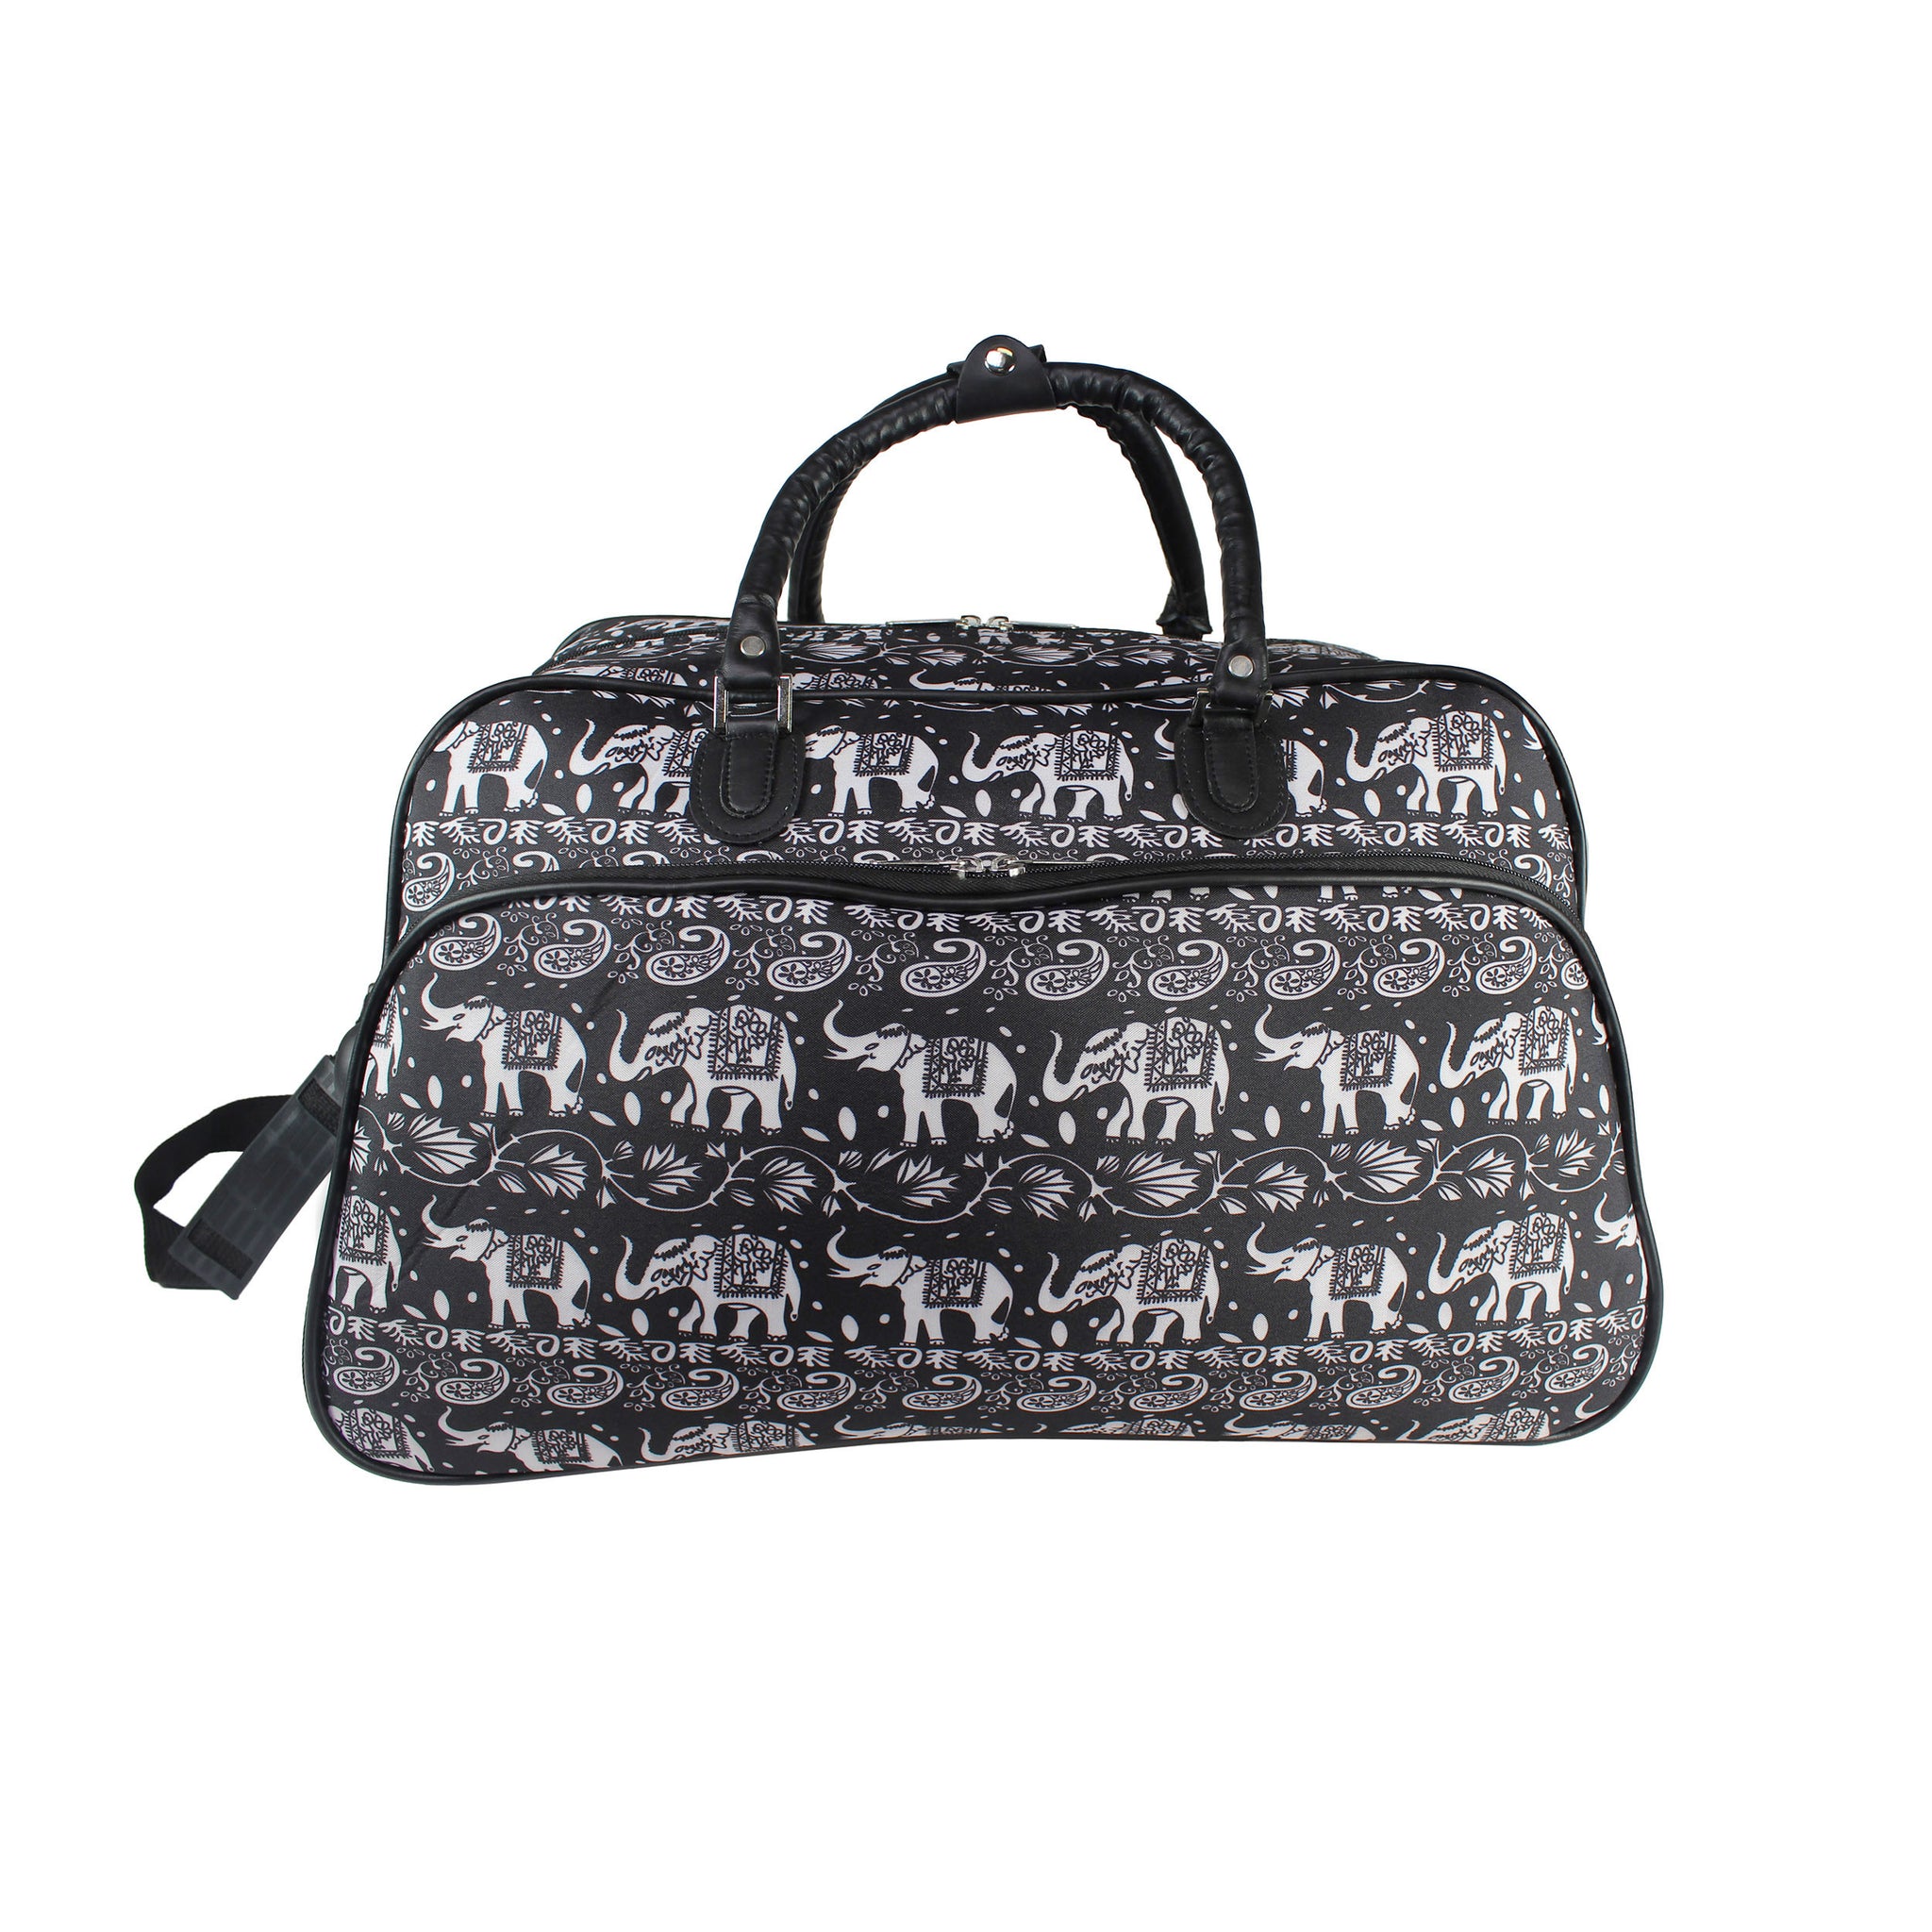 CalBags Elephant 21" Rolling Carry-On Duffel Bags